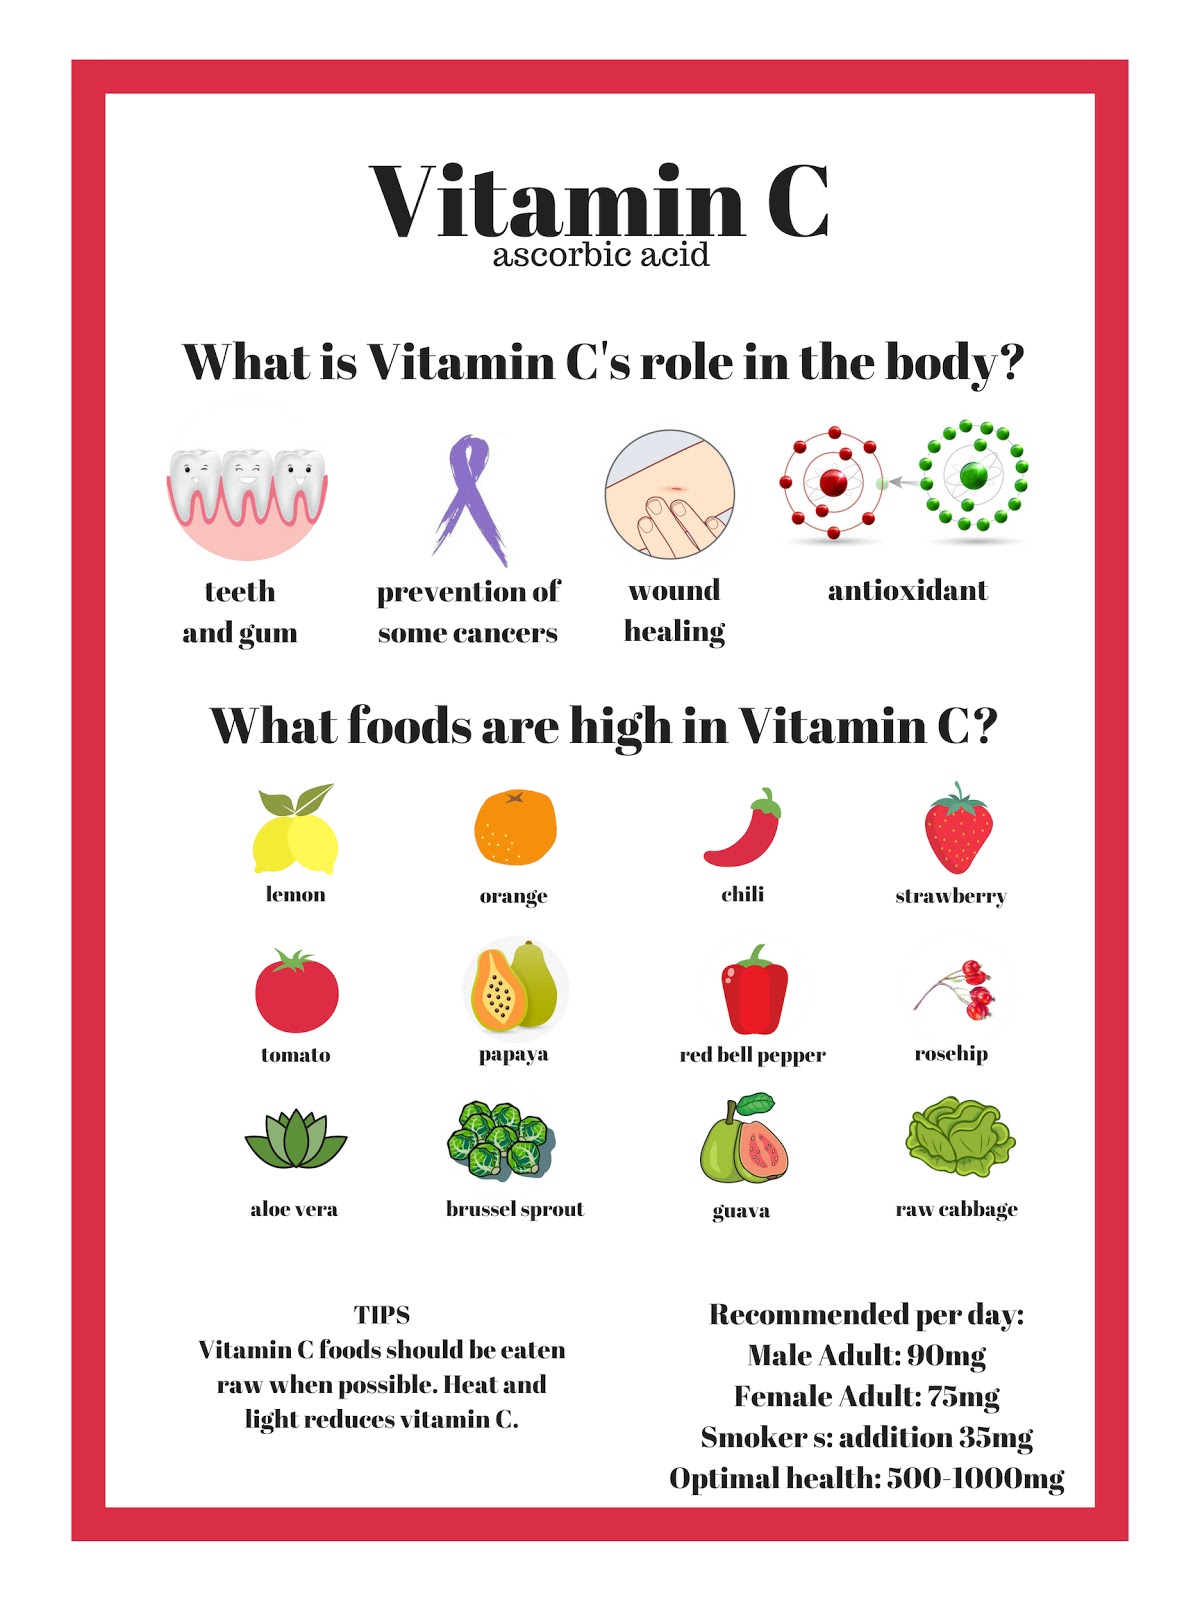 Vitamin C plays a critical role in the body